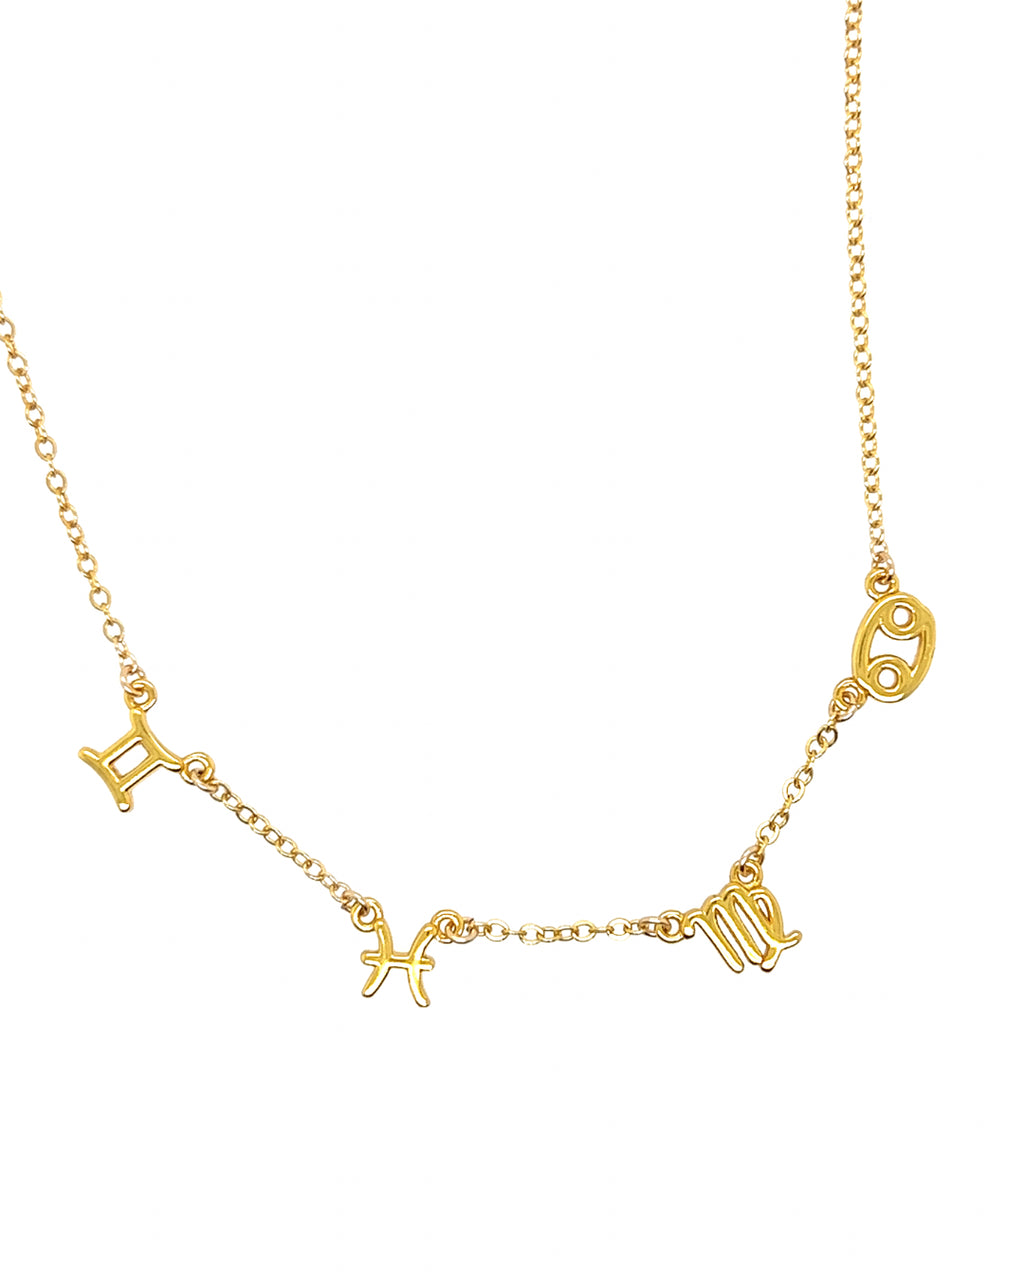 Customizable petite zodiac sign necklace with the option to add up to 7 zodiac symbols